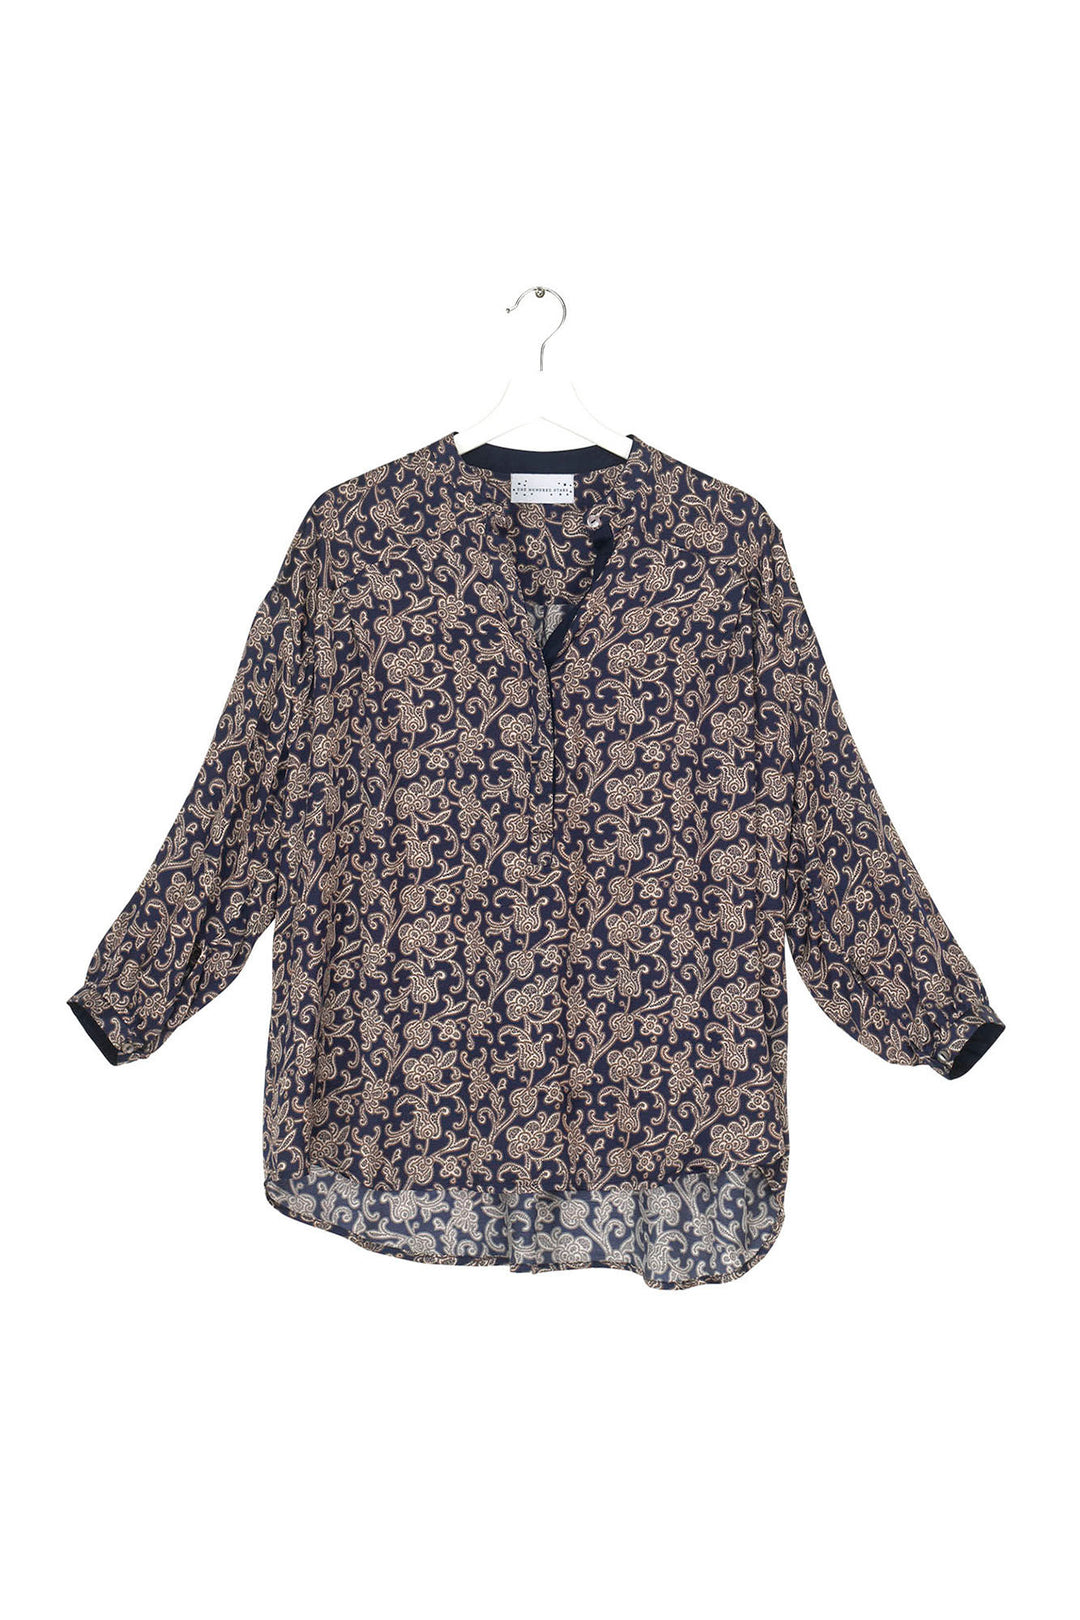 button up satin shirt in blue paisley print by One Hundred Stars